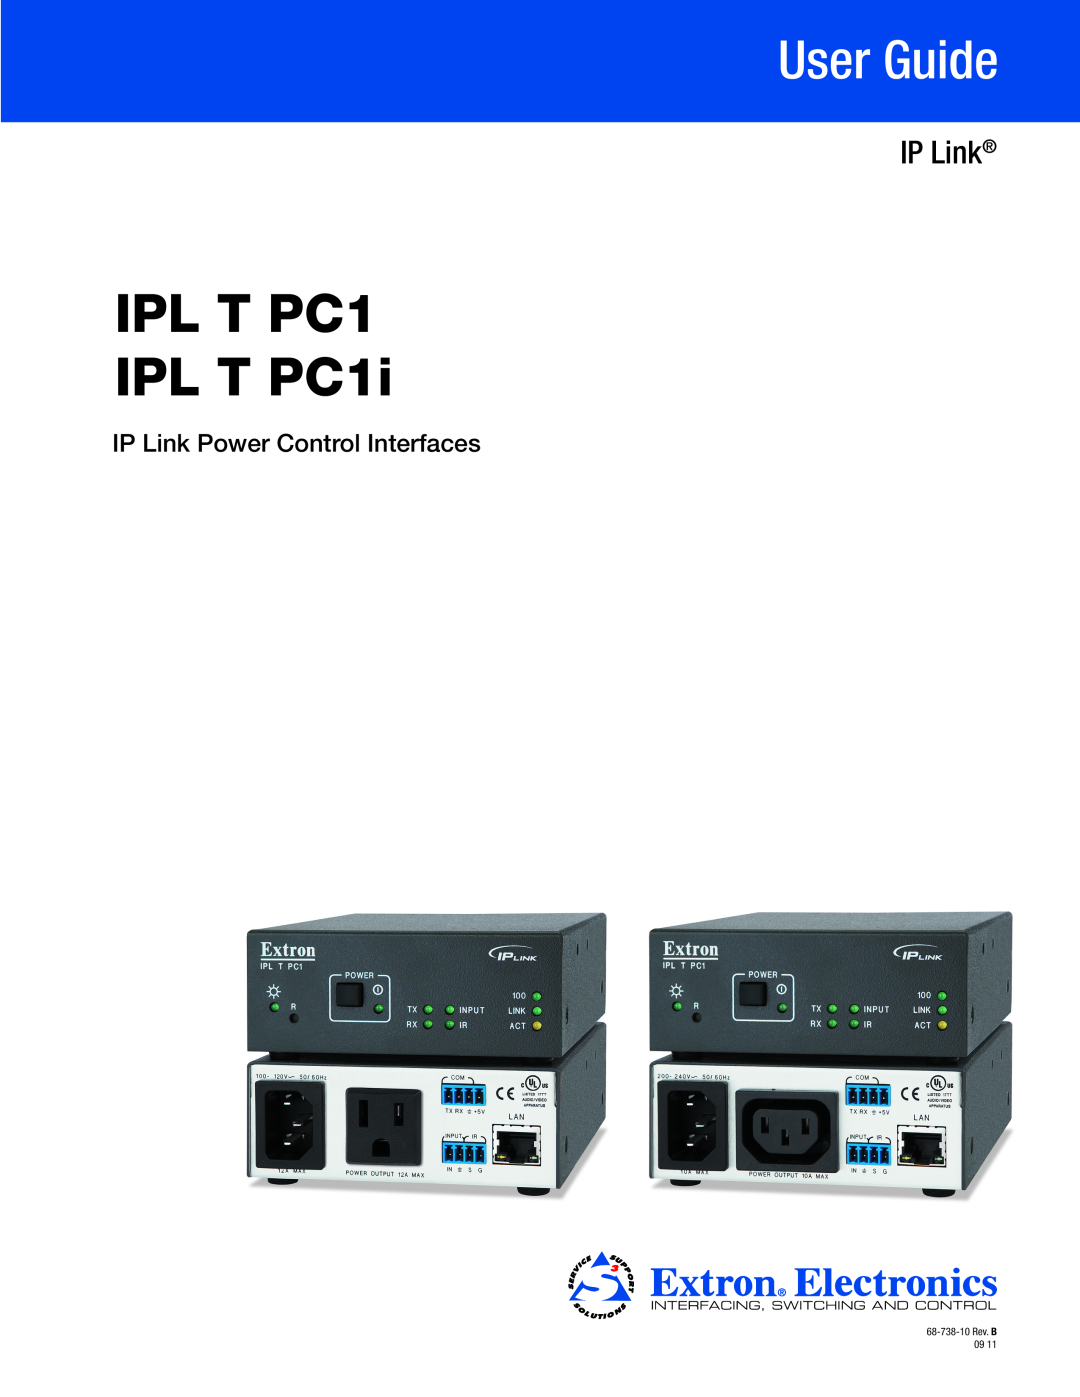 Extron electronic IPL T PC1 specifications AC control interface, Serial control interface, Ethernet control interface 